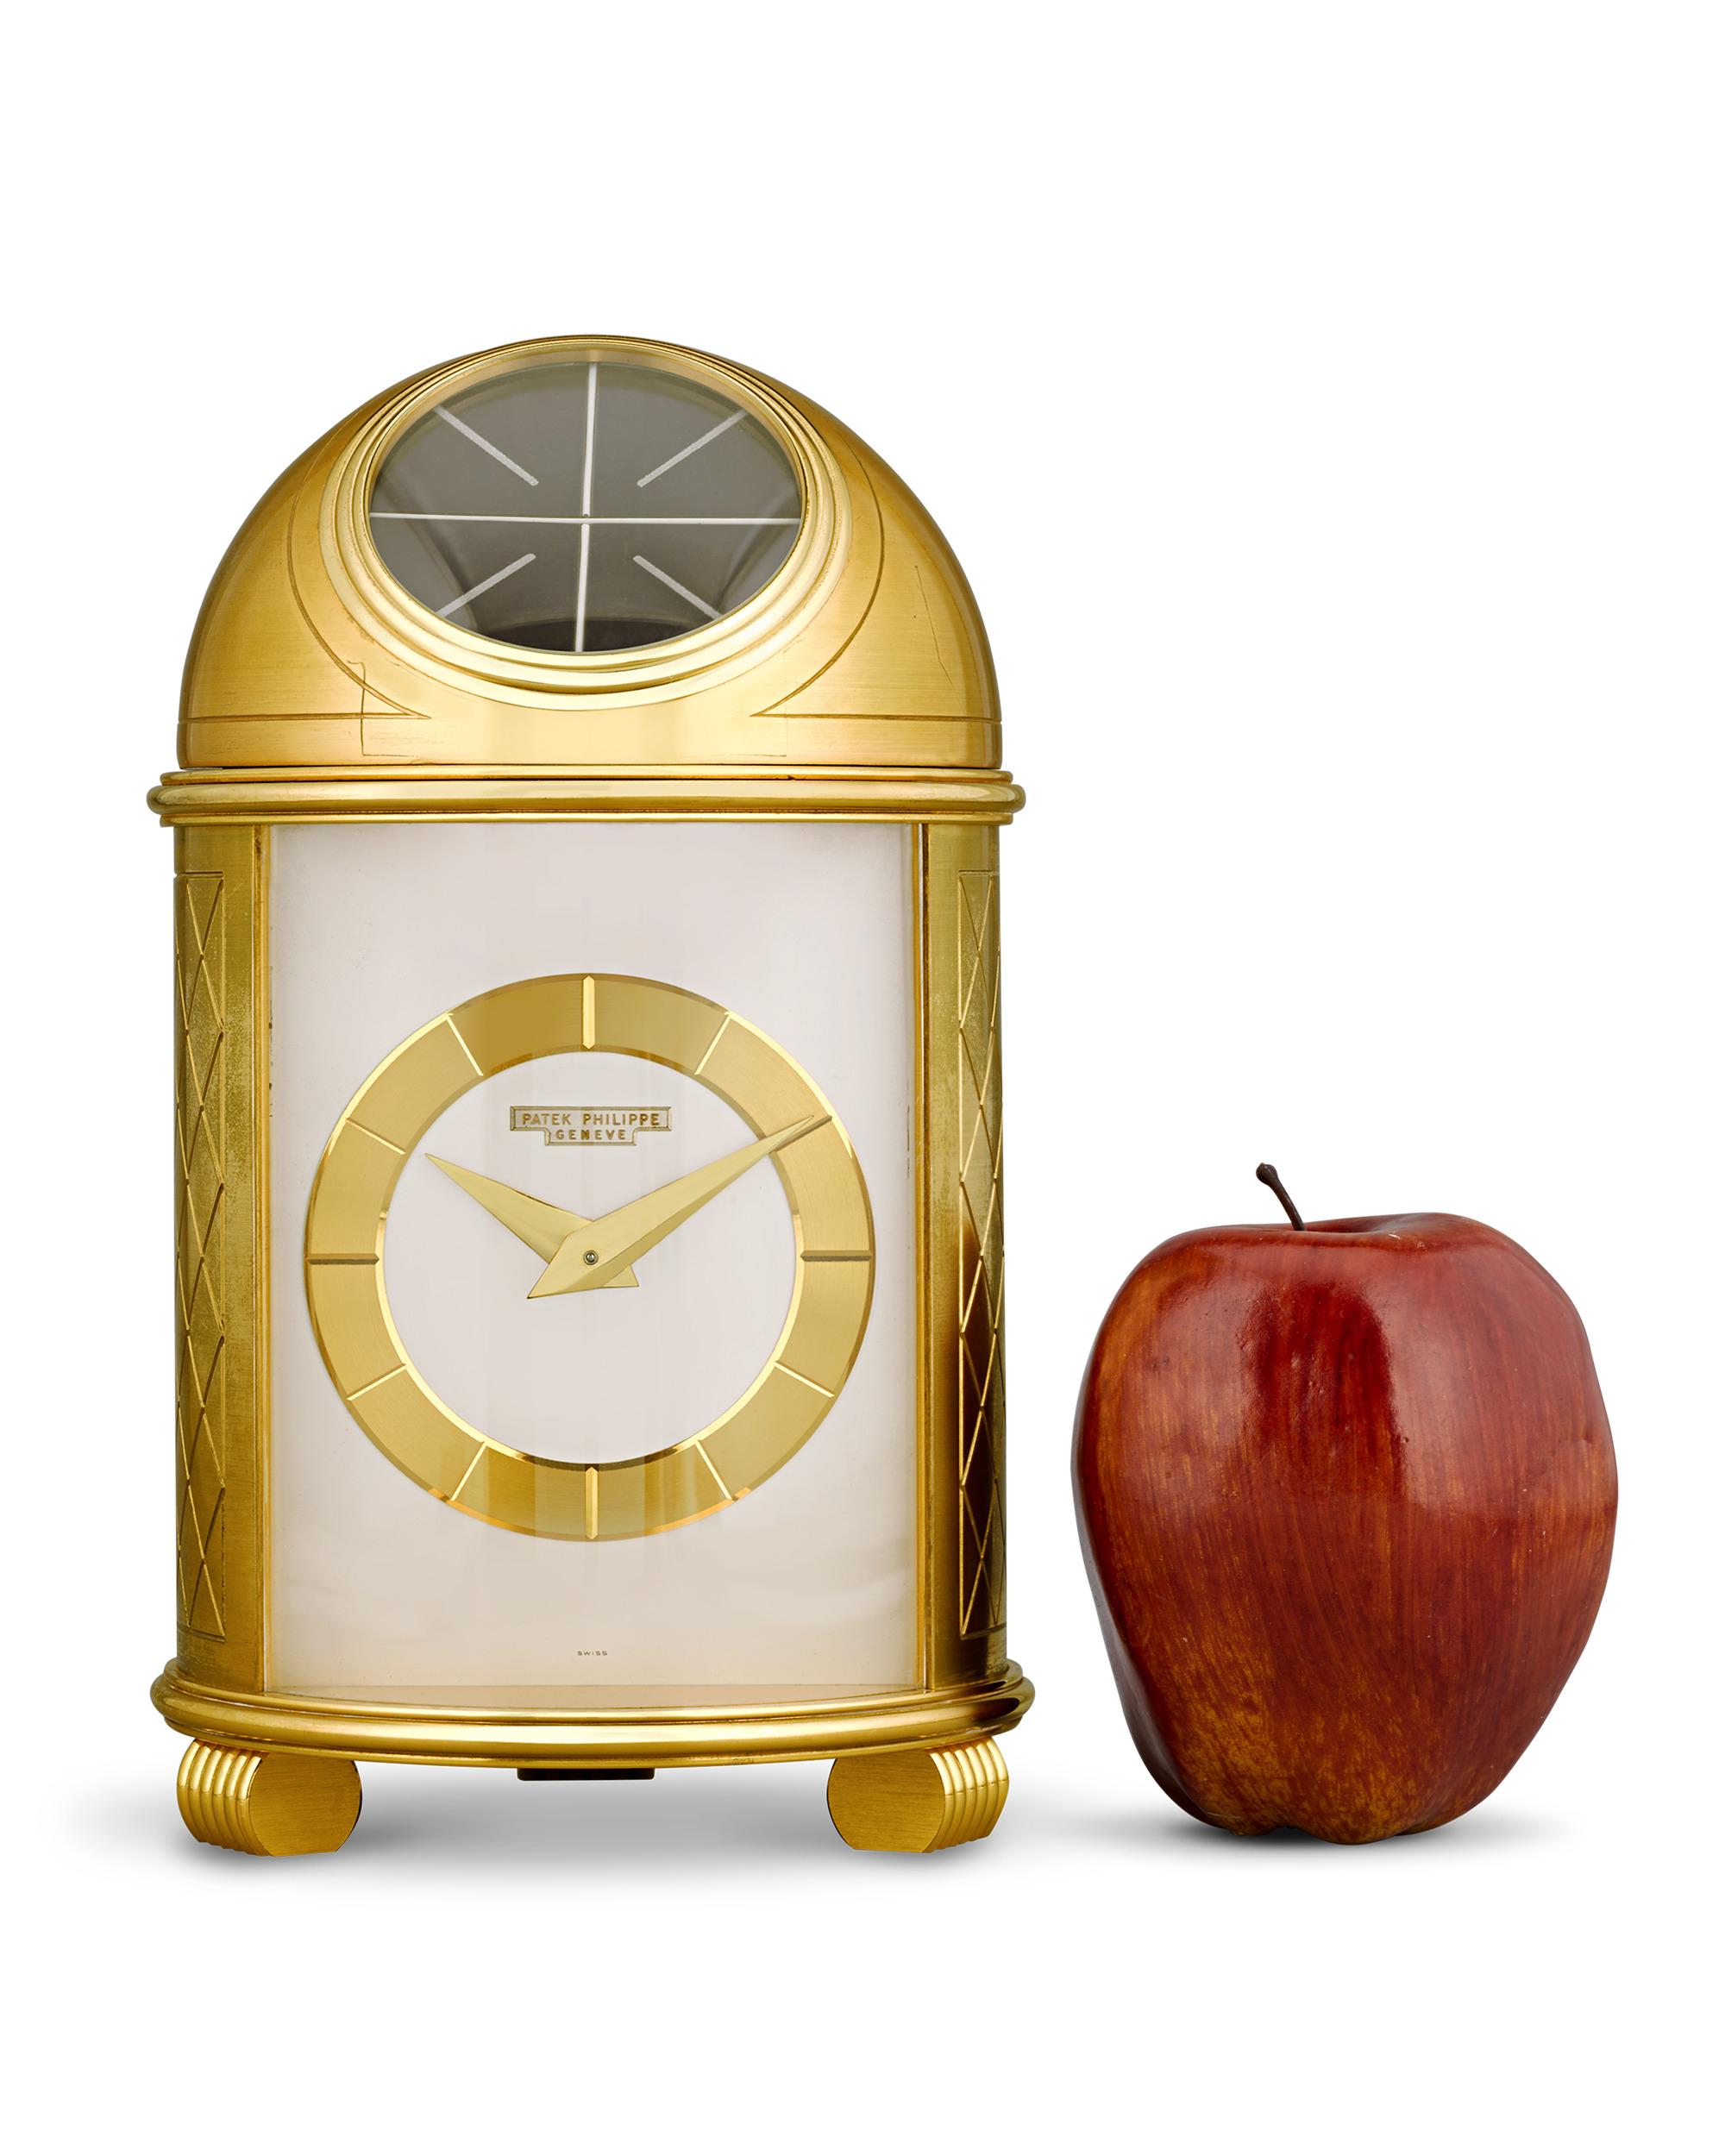 The dome clock is among the most iconic designs of the early Patek Philippe solar timepieces. First conceptualized in 1956, the accompanying archival paperwork to this clock states that it was crafted in 1957, making this timepiece one of the